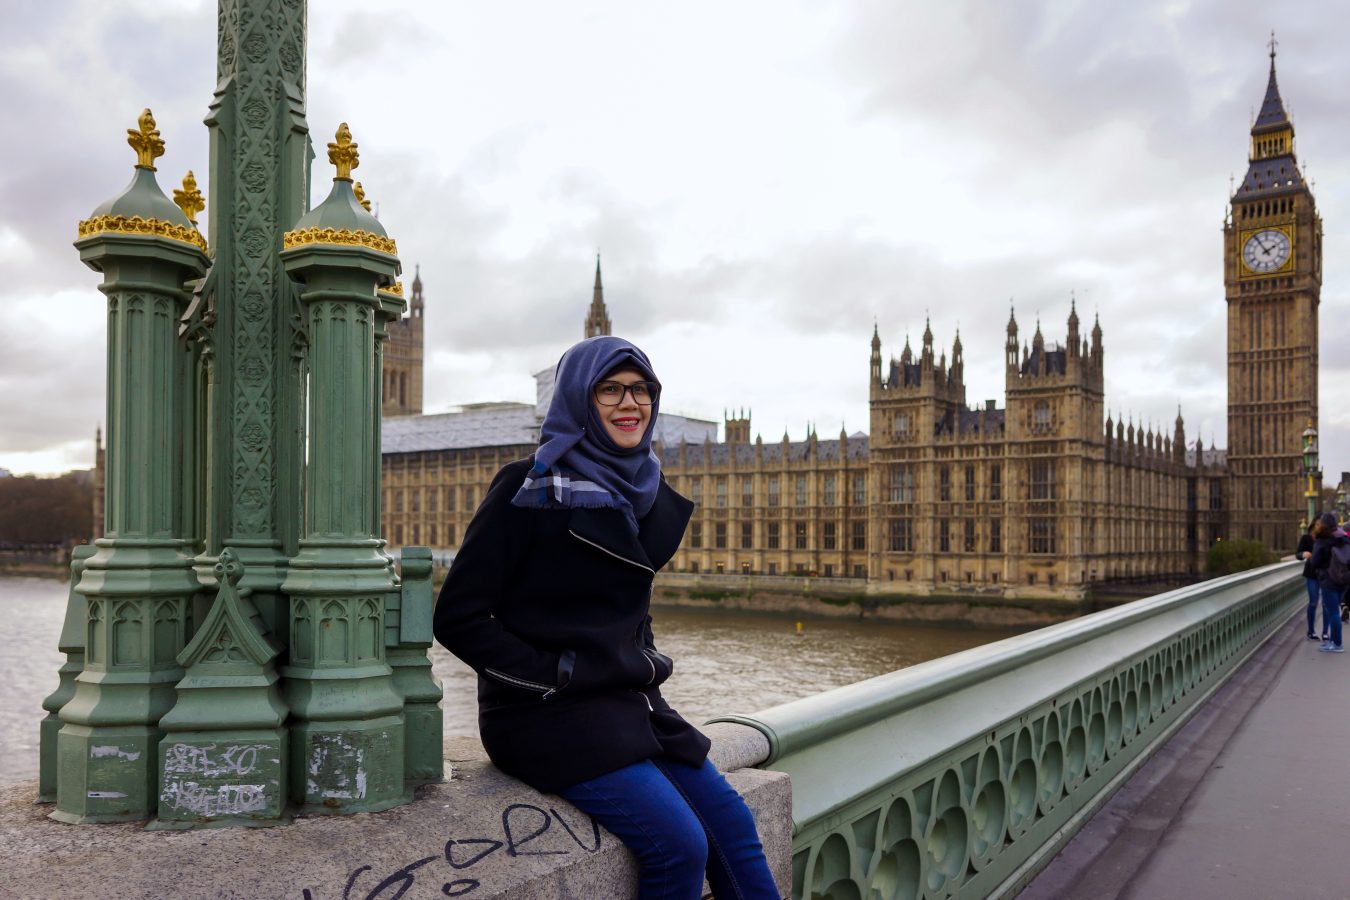 F1 visa student traveler wearing a hijab sits on a beach in London with Big Ben in the background.